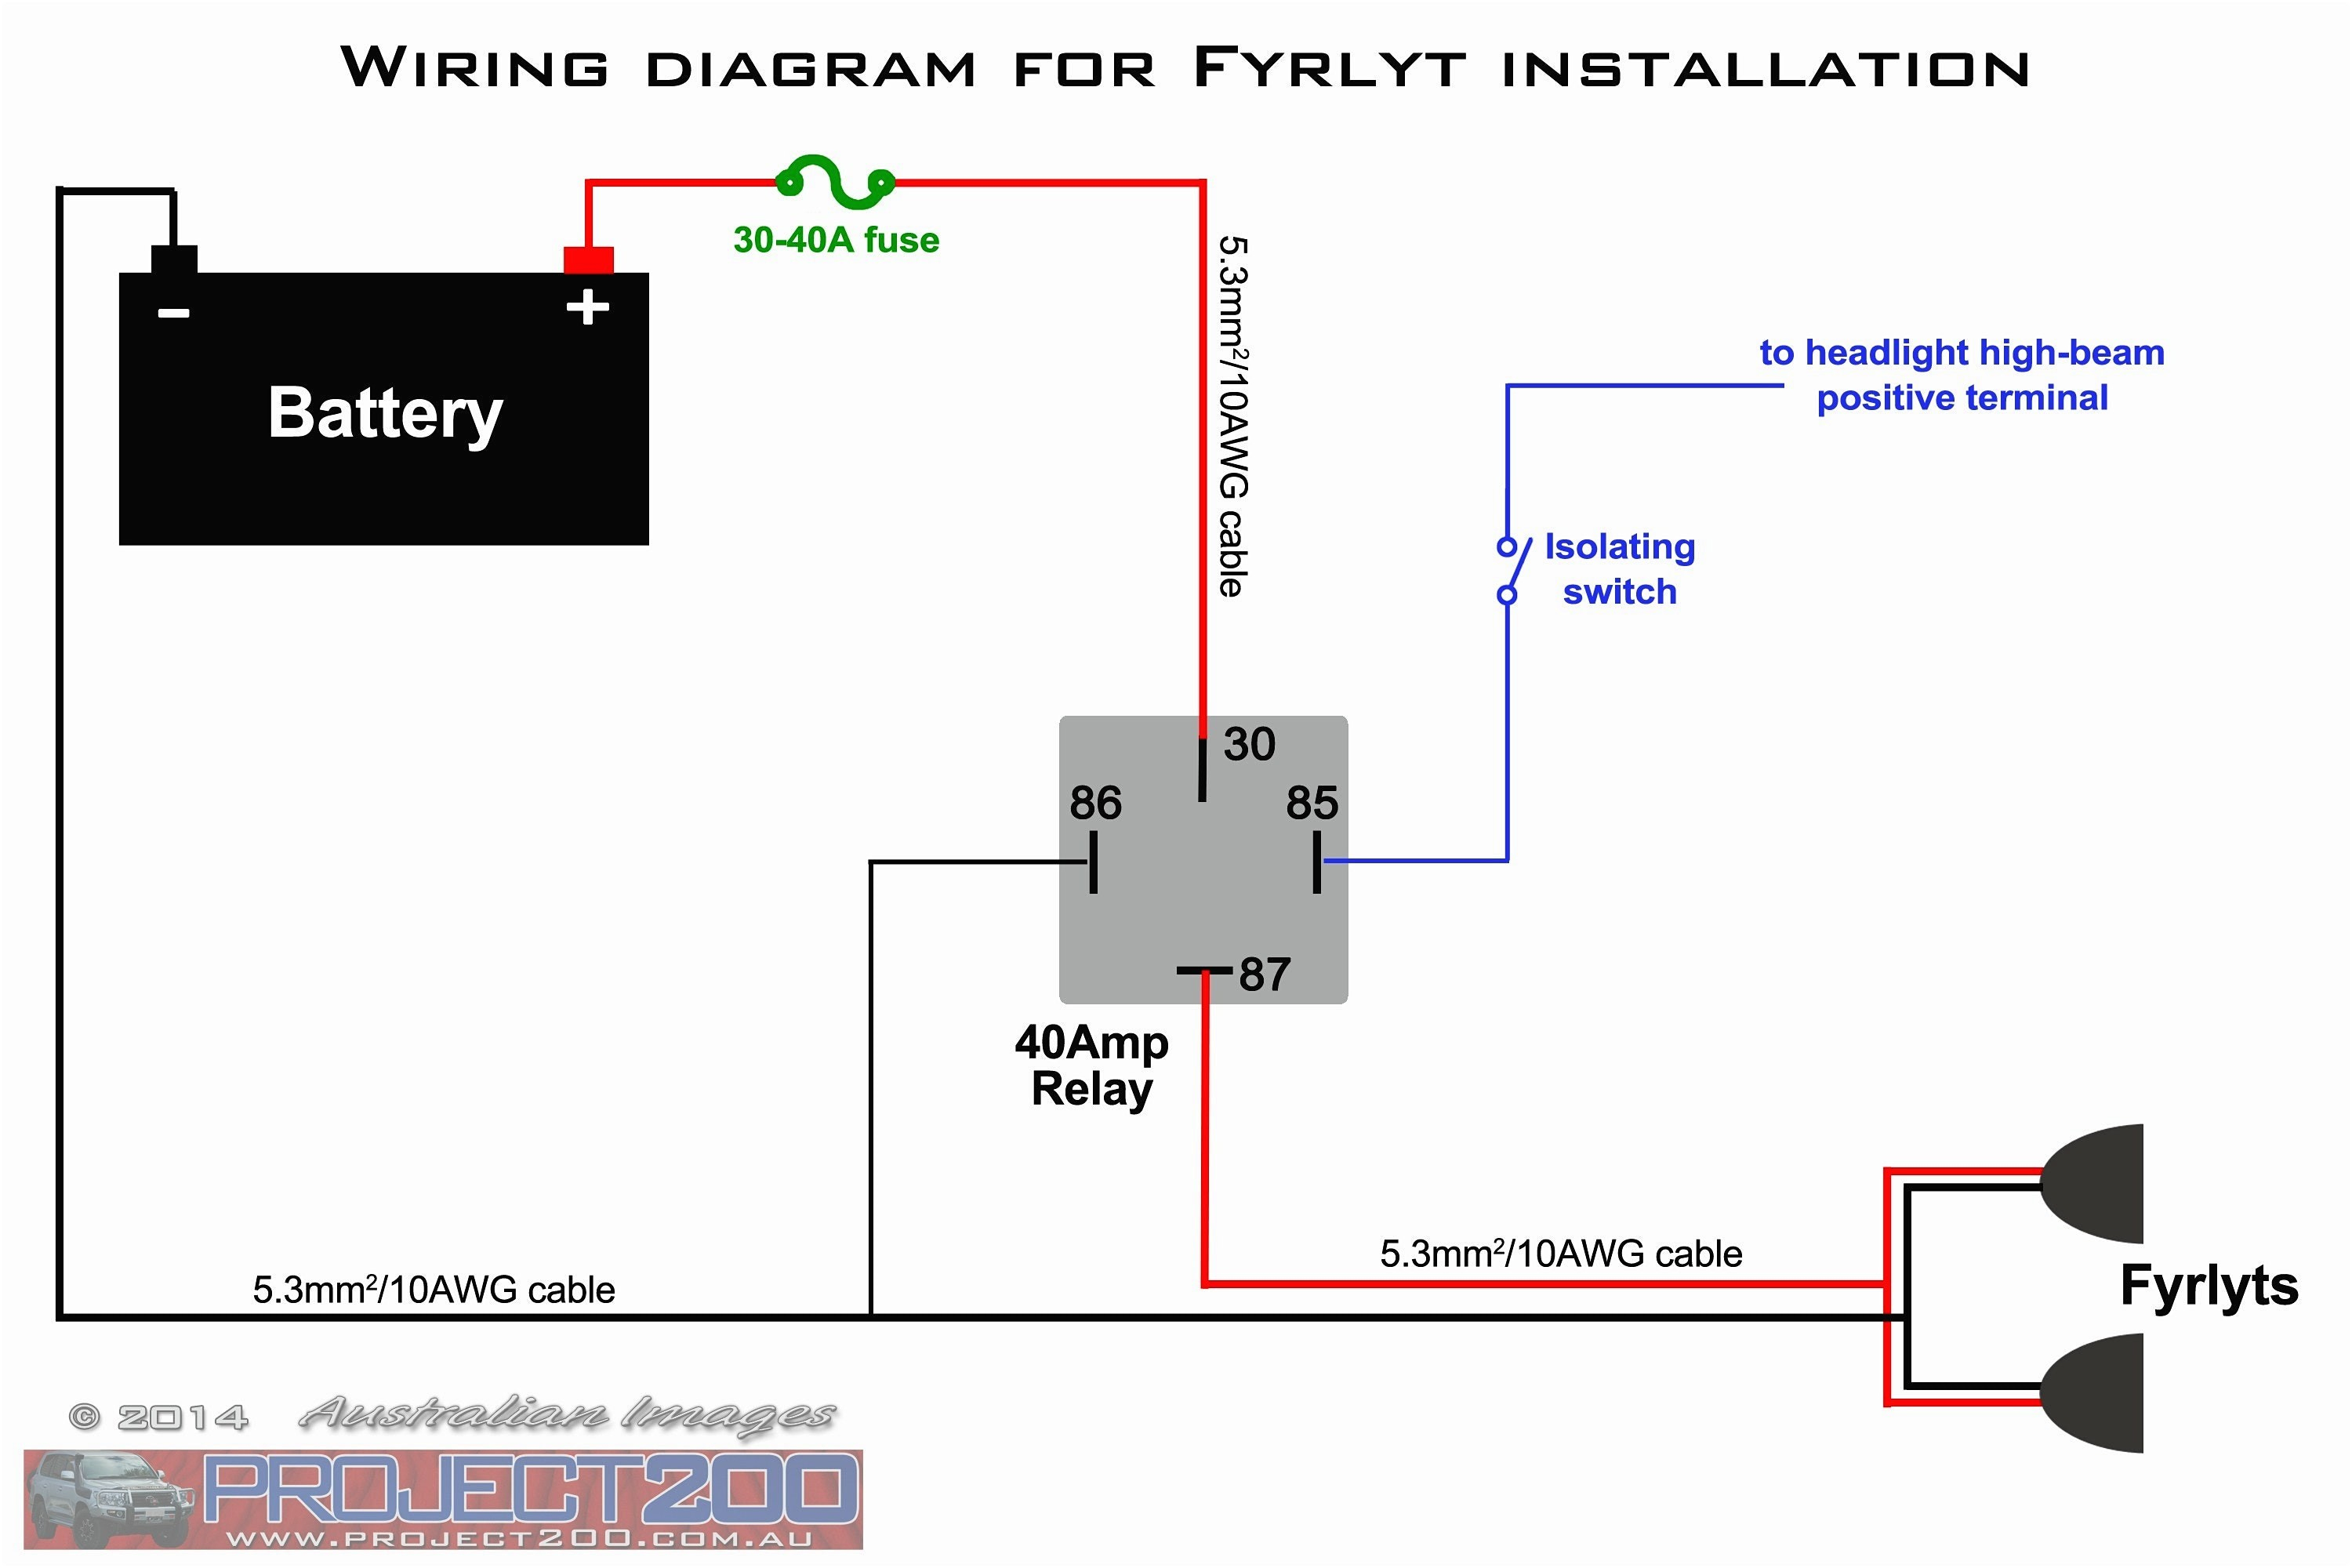 Wiring Diagram For Hid Headlights | Wiring Library - Hid Wiring Diagram With Relay